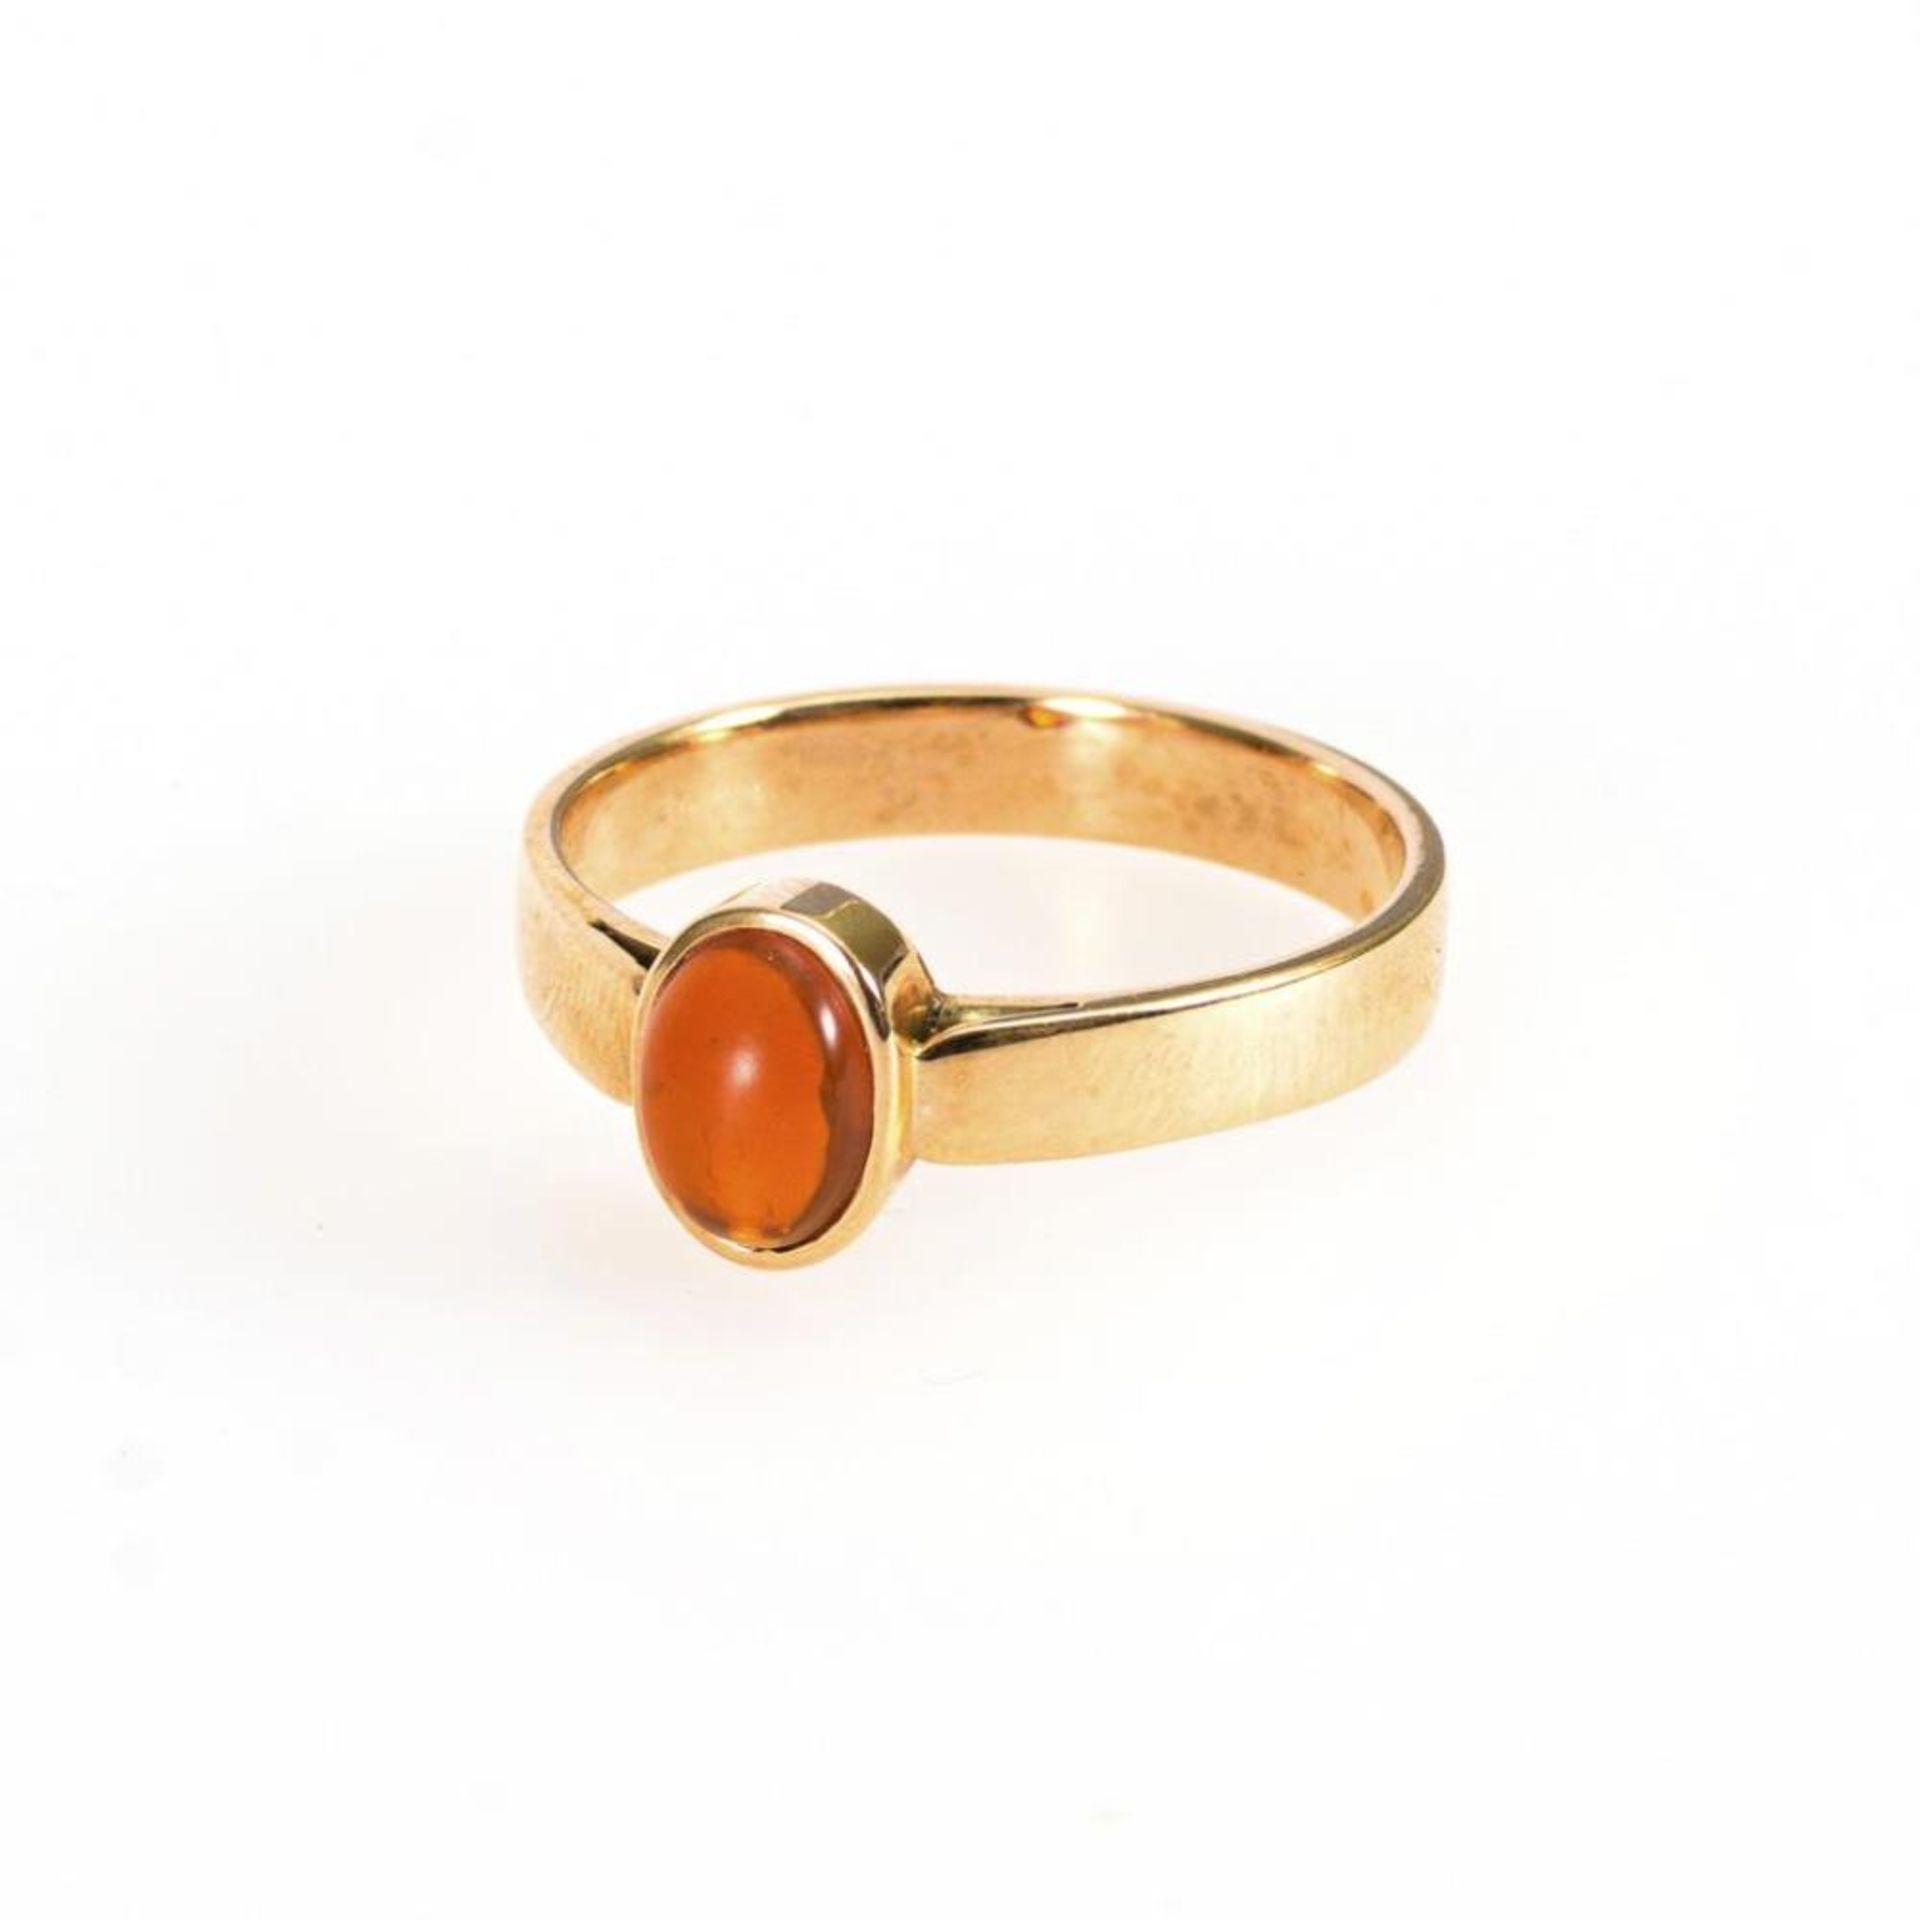 Ring mit Feueropal. - Image 2 of 2